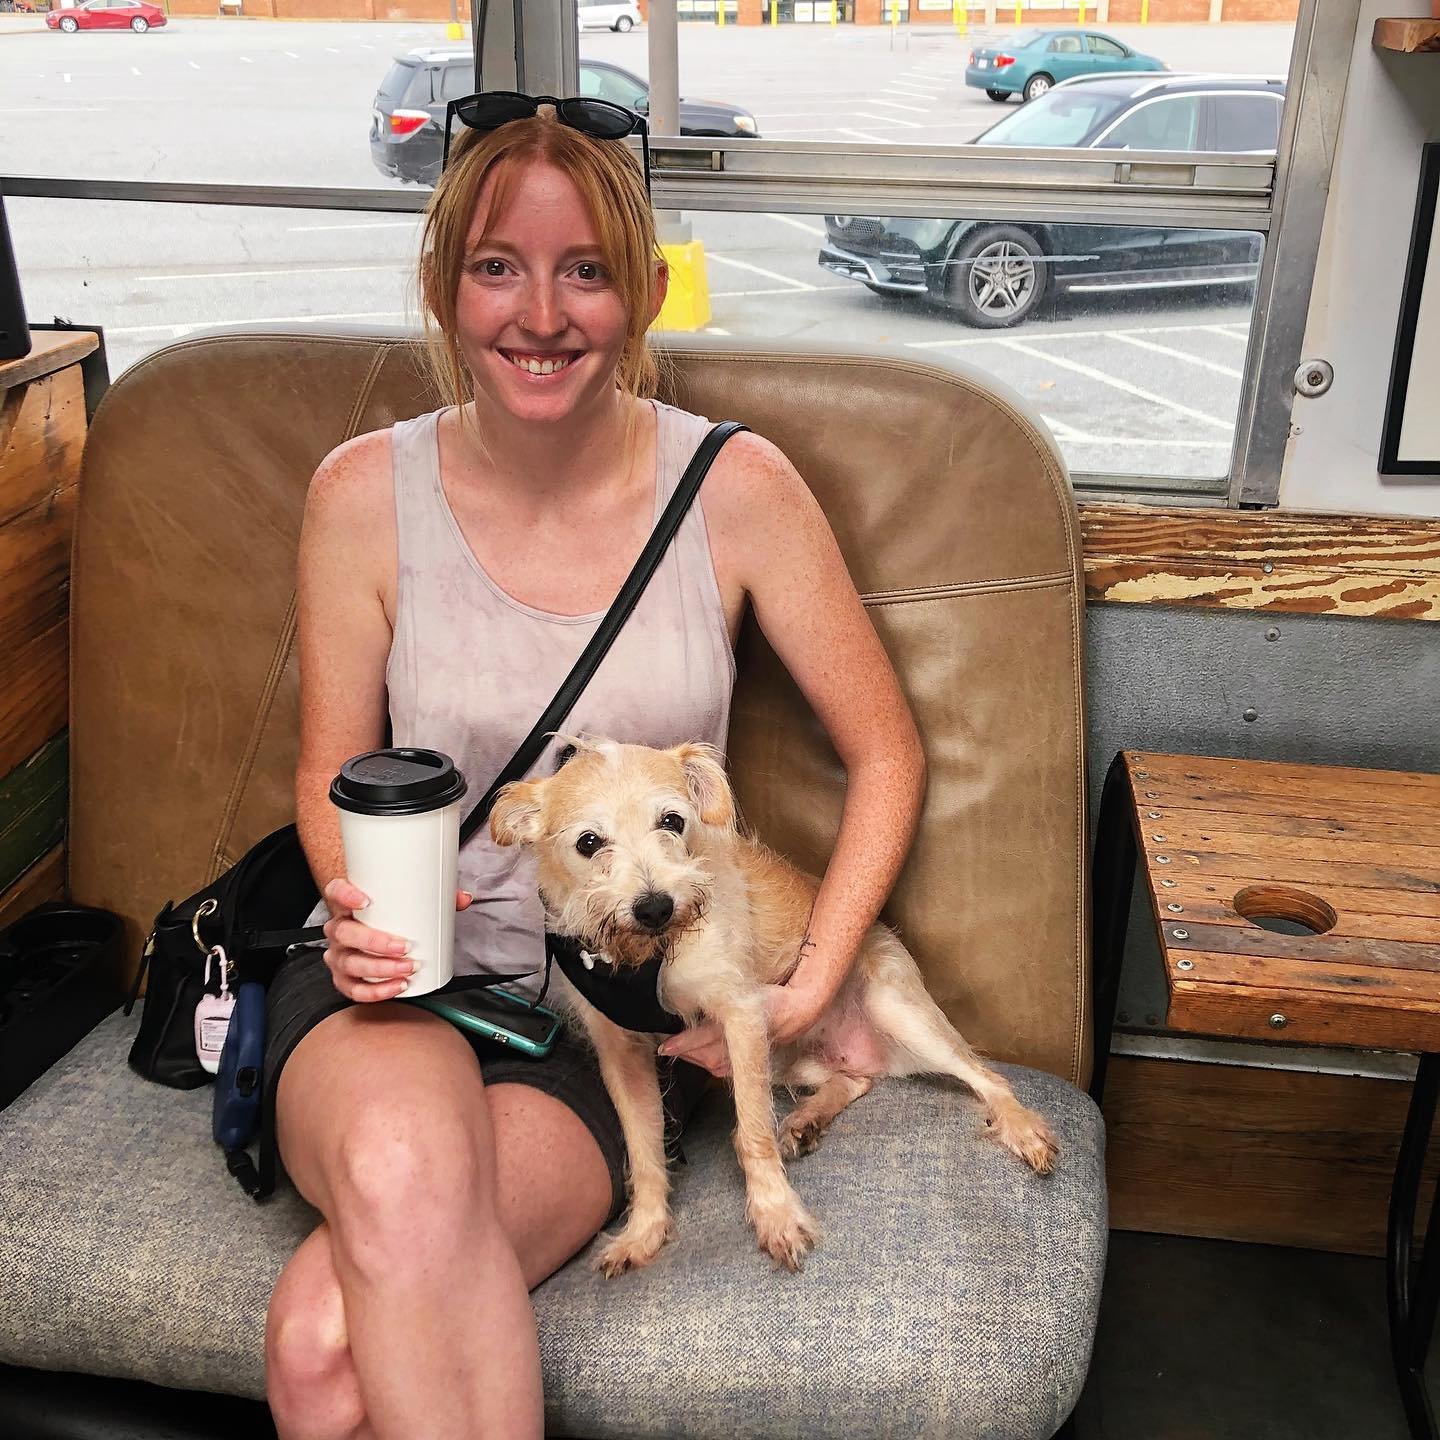 Caitlin and Rascal stopped by for some coffee and convo on their way to Tennessee this lovely, brisk summer morning. Hope everyone is starting out their week in equally good company!🌿